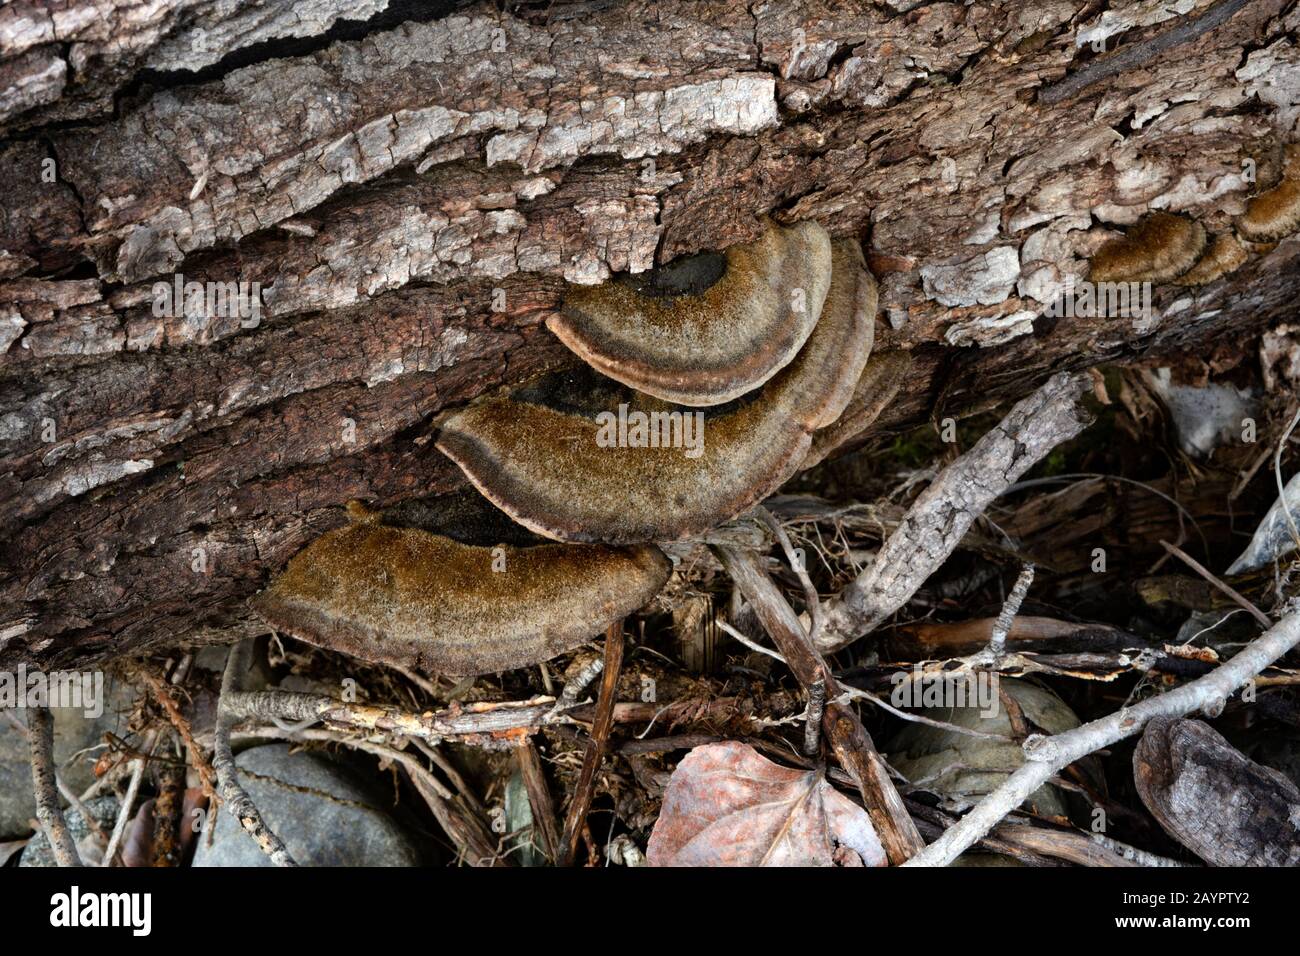 Trog's tramete. The fruiting body of a white rot fungus, Trametes trogii, growing on the trunk of a dead black cottonwood tree. Stock Photo